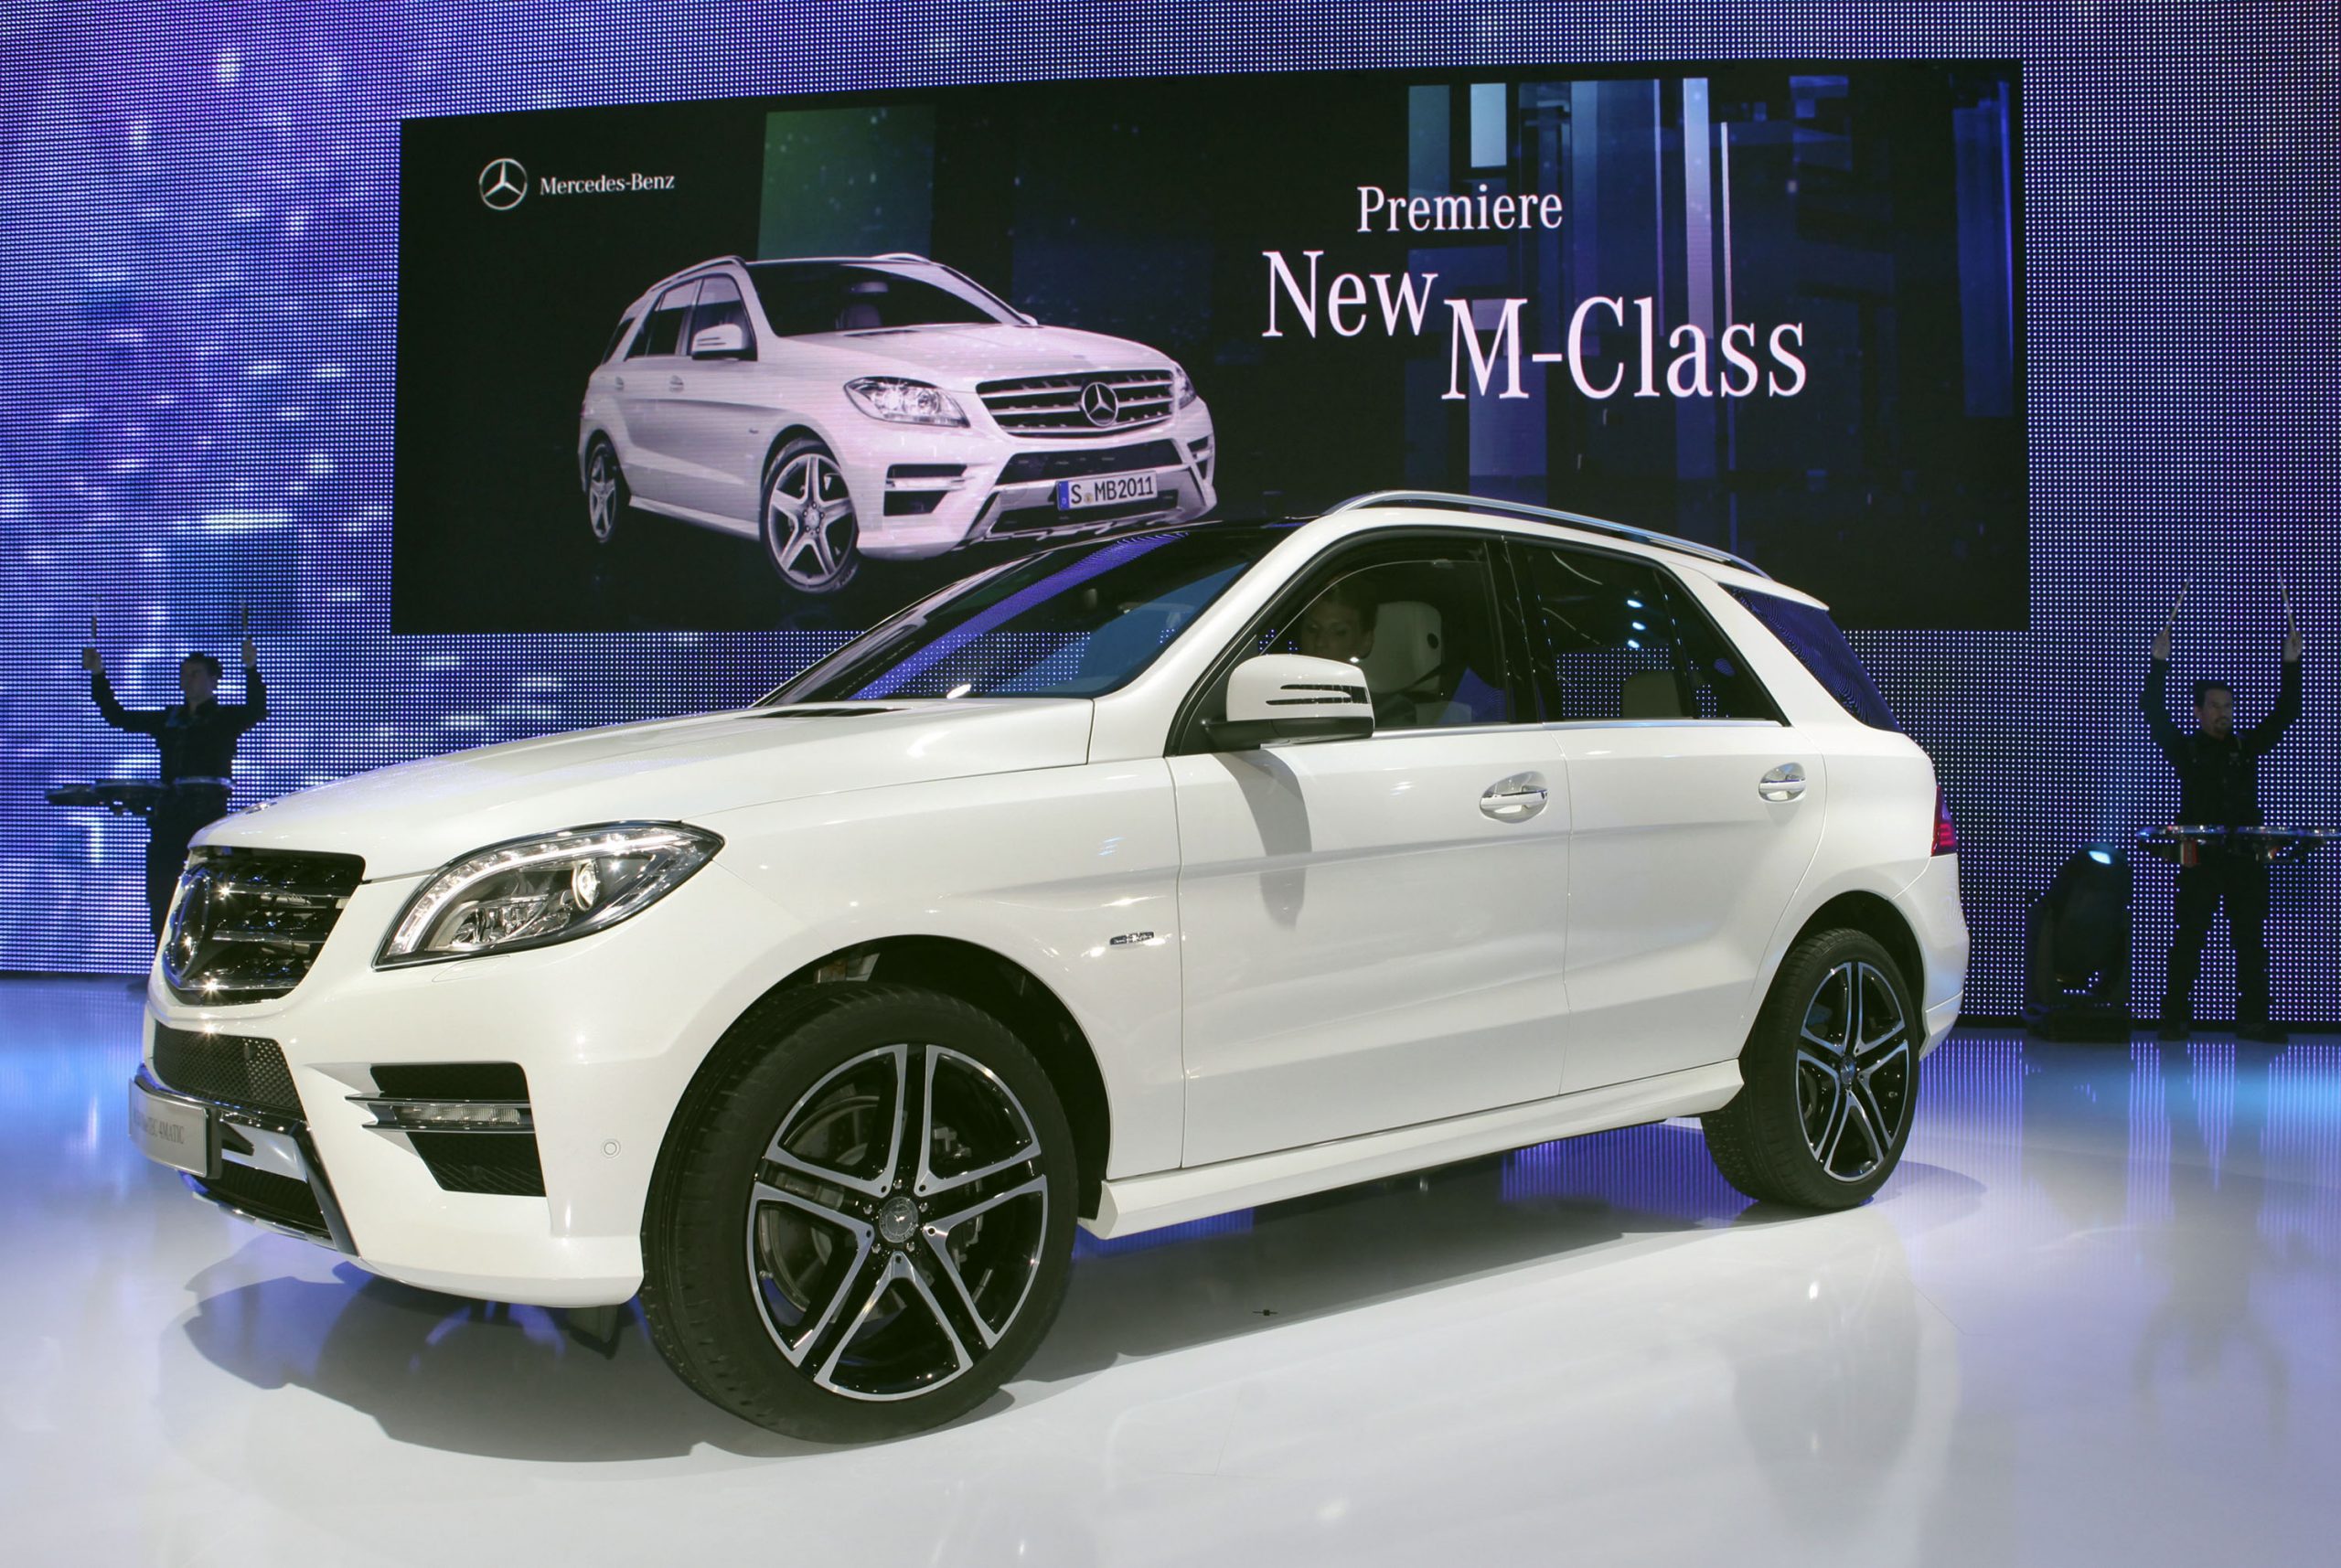 A white Mercedes M-Class SUV on display